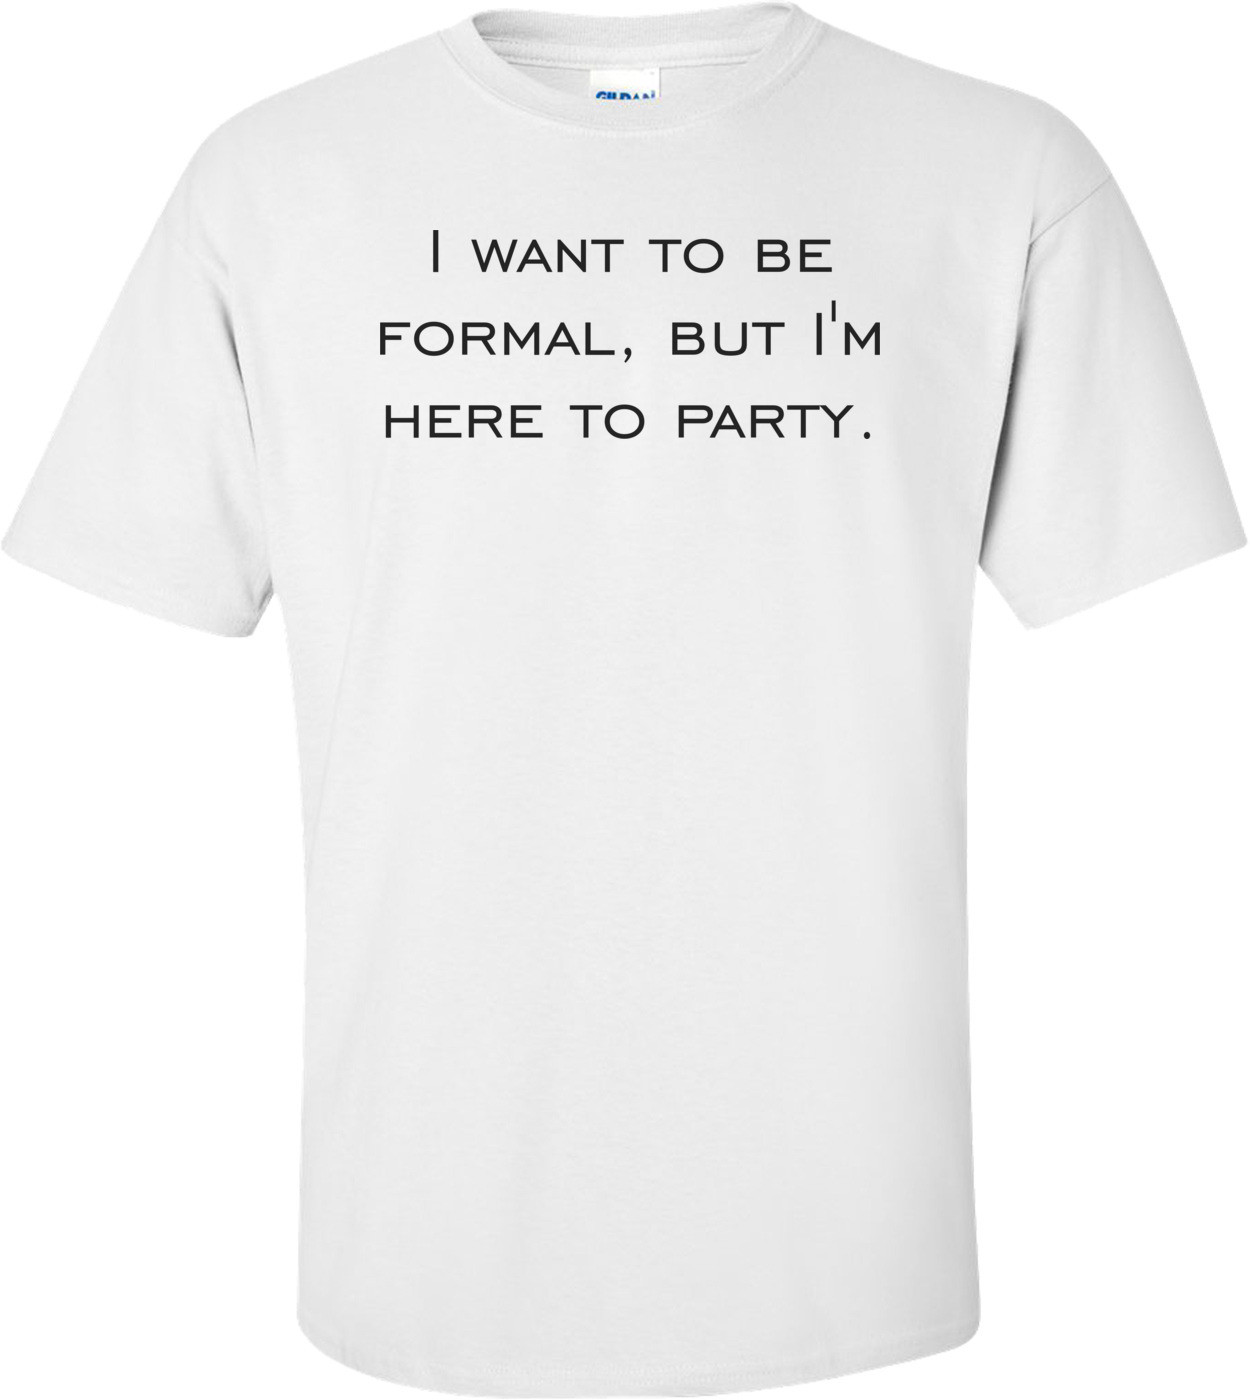 I want to be formal, but I'm here to party.